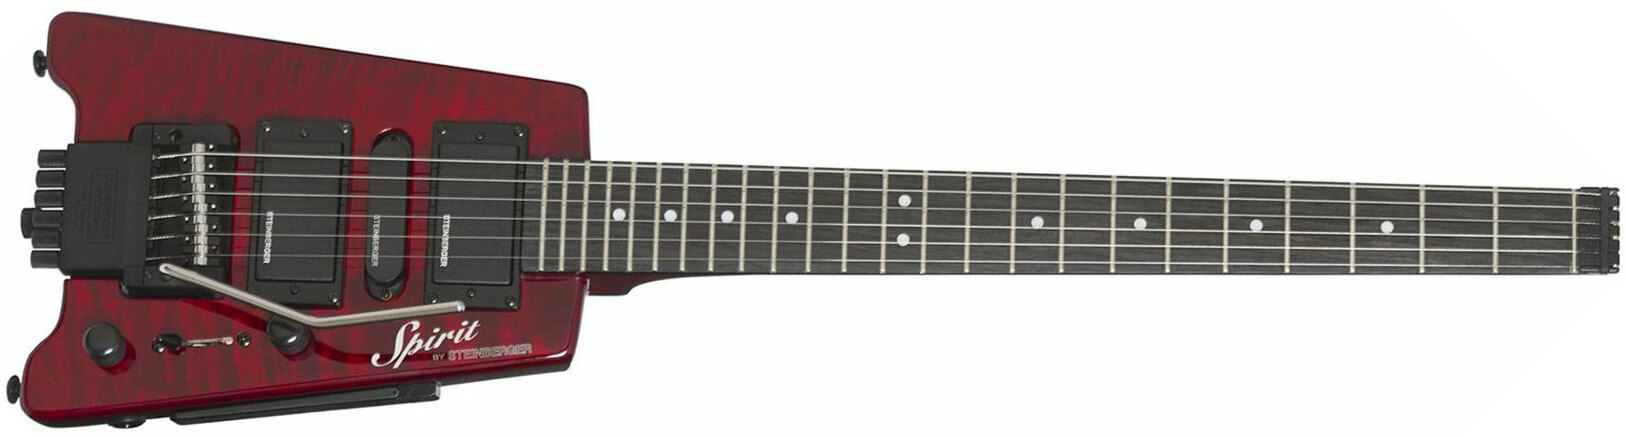 Steinberger Gt-pro Deluxe Quilt Top Outfit Hsh Trem Rw +housse - Wine Red - Elektrische Reisegitarre - Main picture